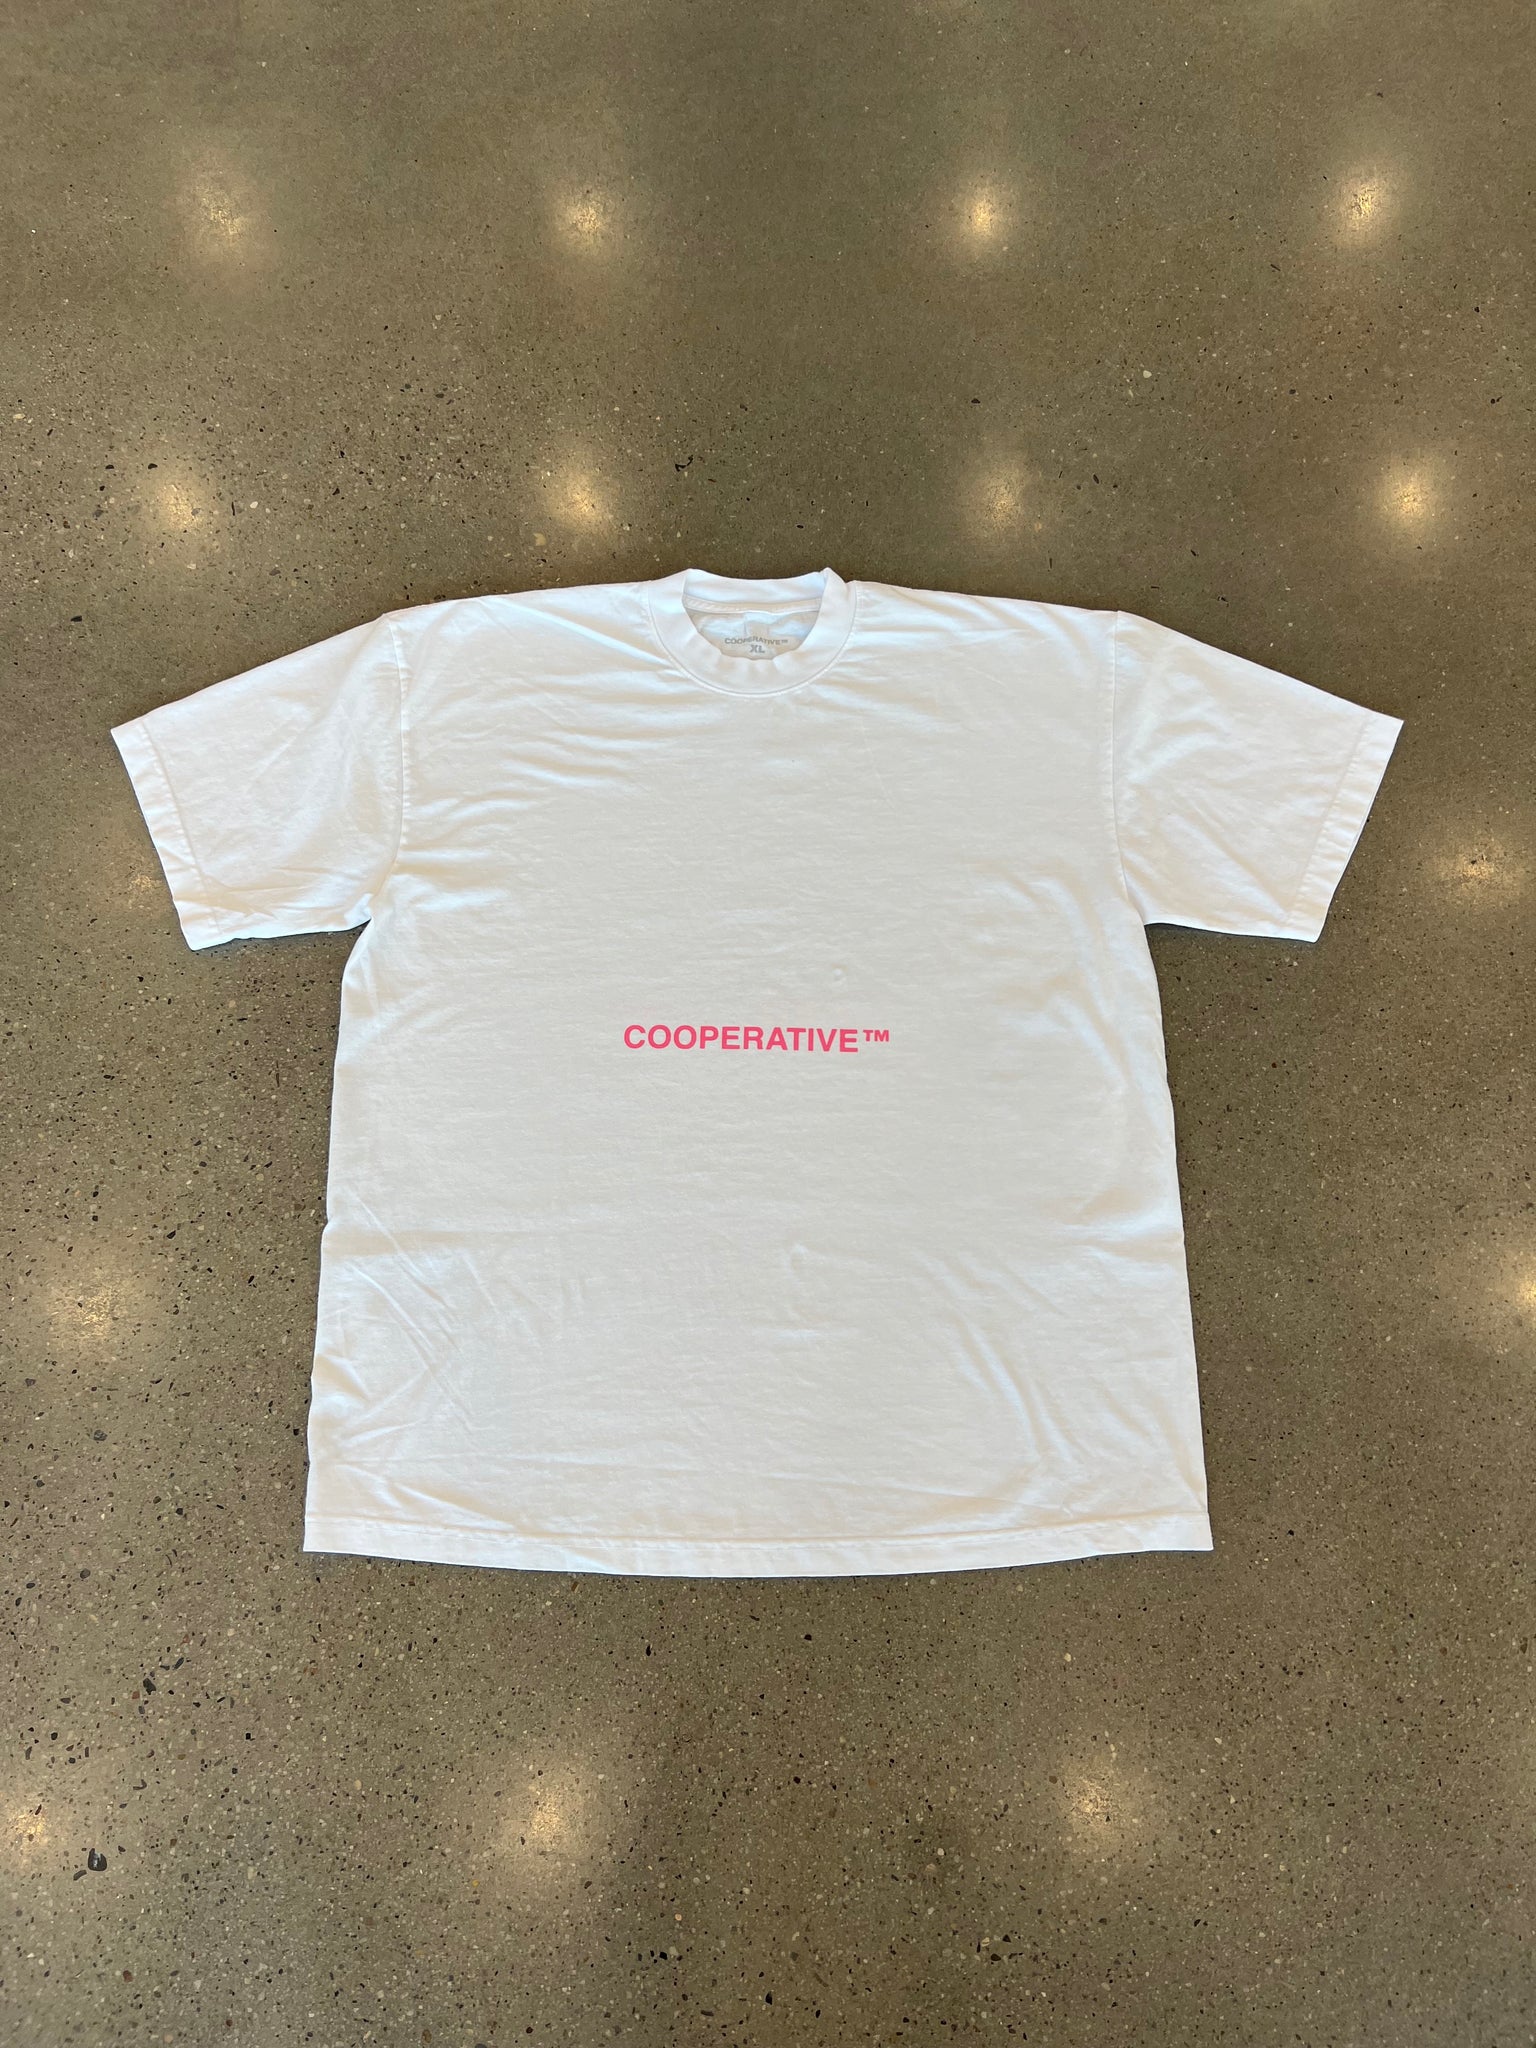 Cooperative Tee White Pink Lettering